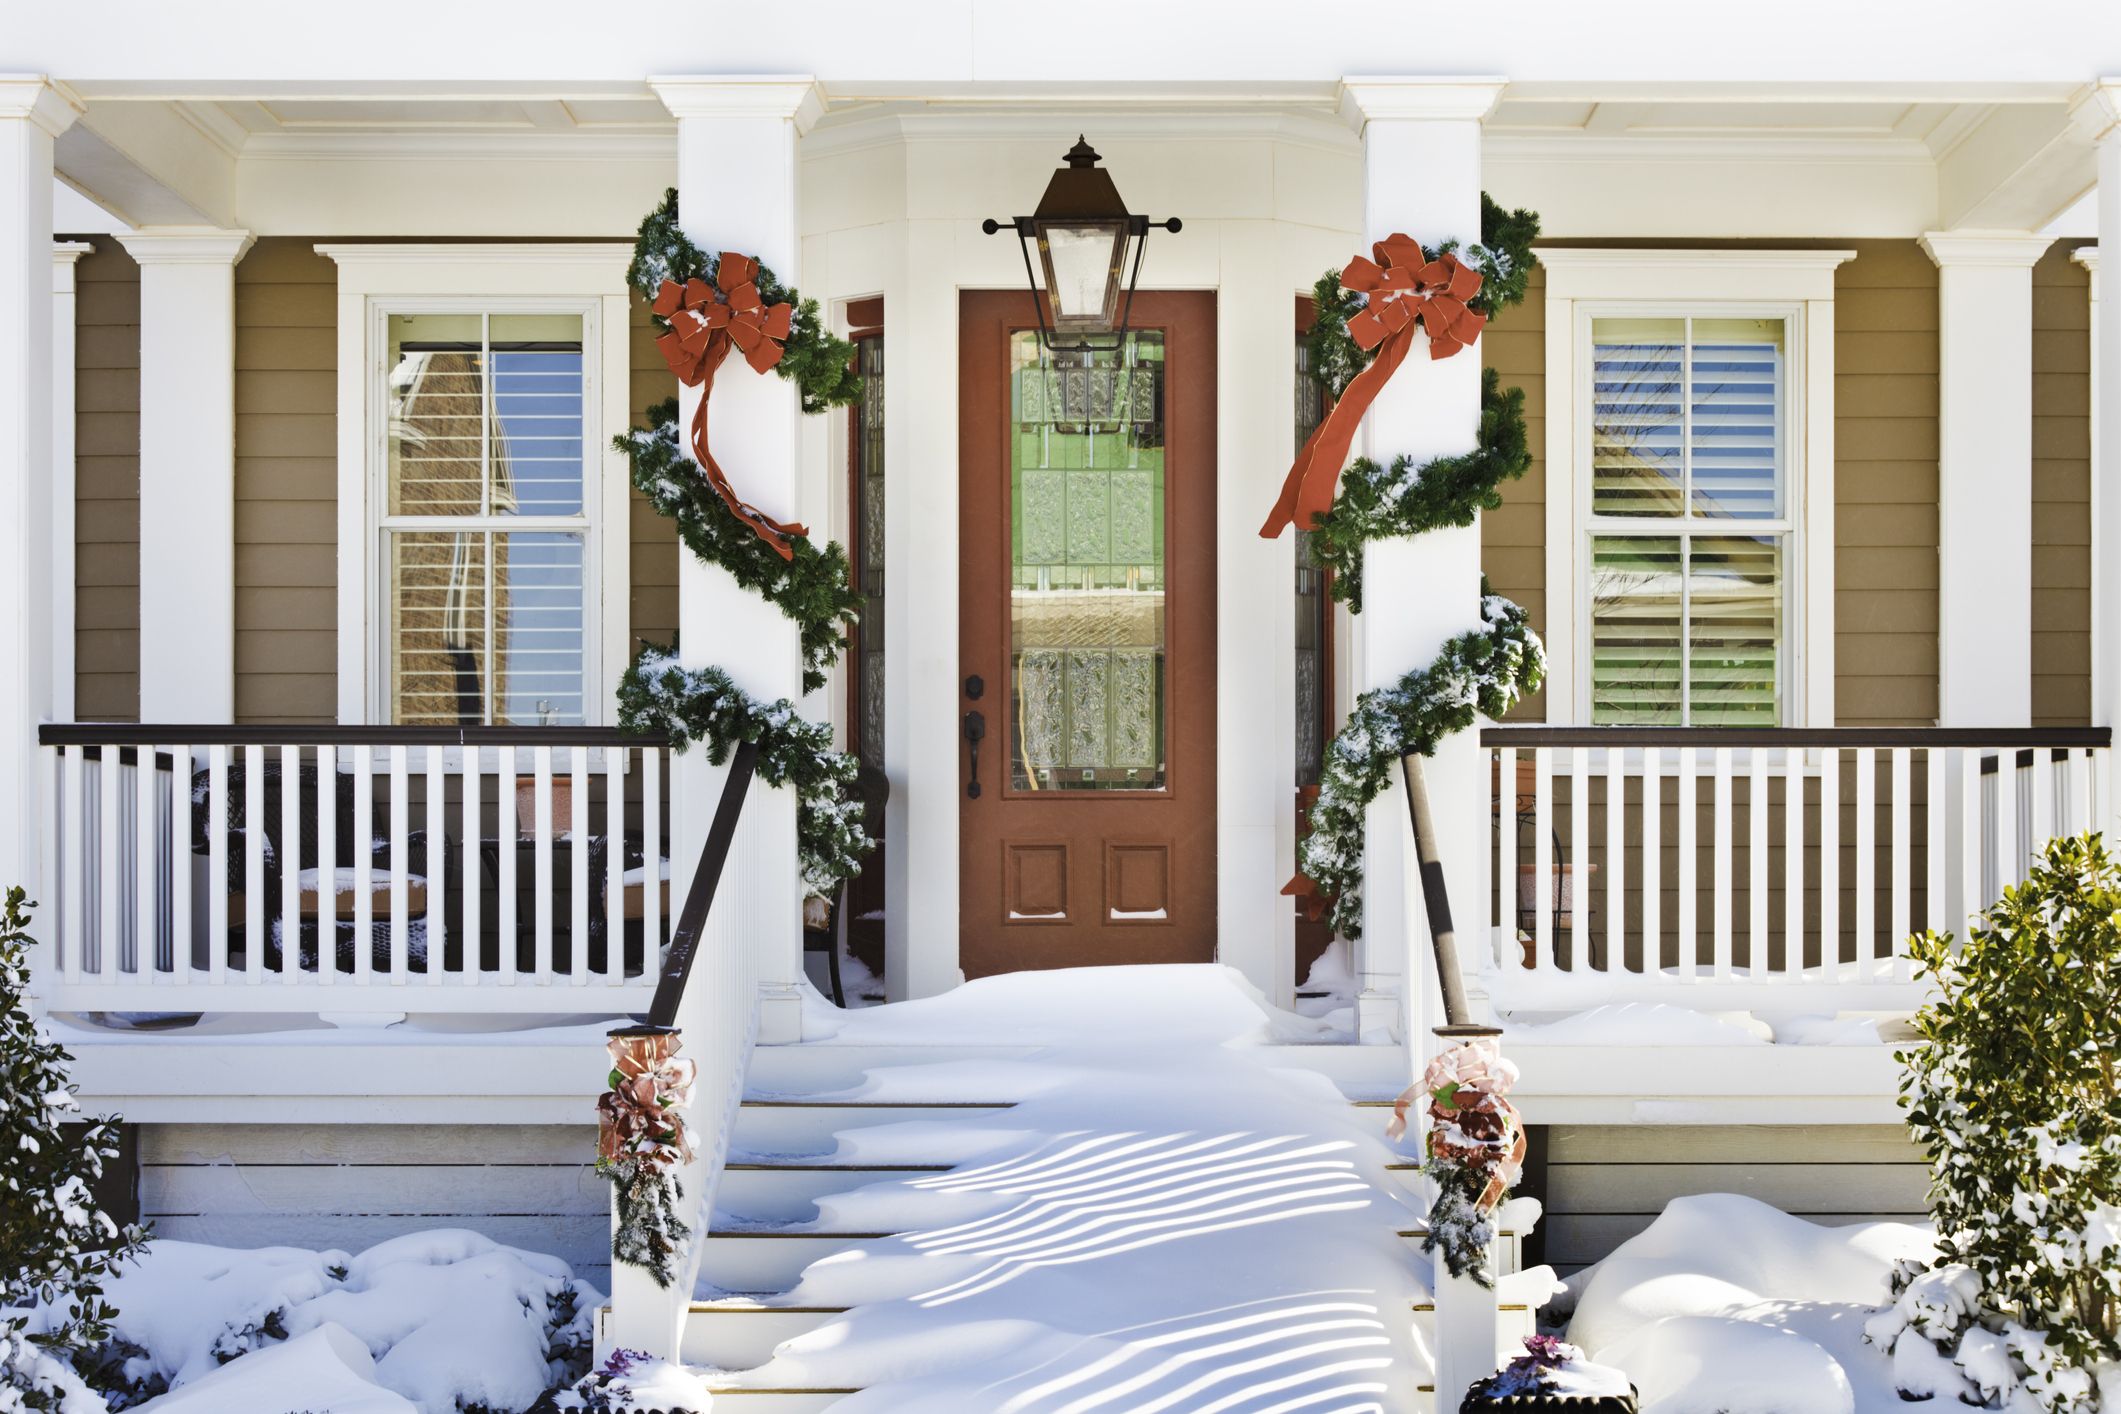 45 Top Images Decorations For Front Of House / How To Decorate Your Porch For Christmas In A Warm Climate House Full Of Summer Coastal Home Lifestyle